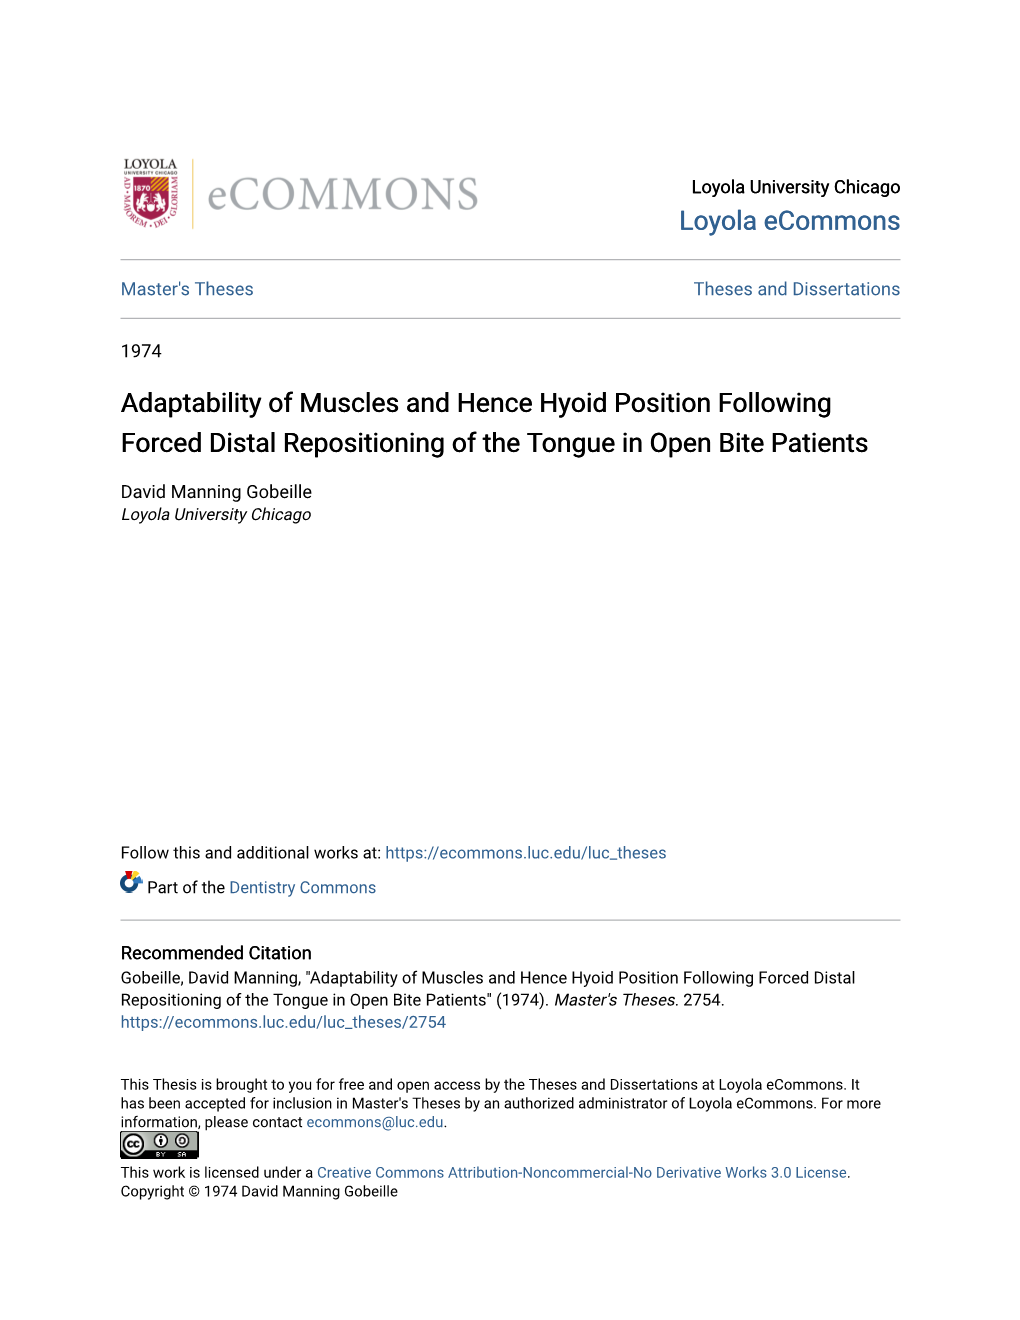 Adaptability of Muscles and Hence Hyoid Position Following Forced Distal Repositioning of the Tongue in Open Bite Patients